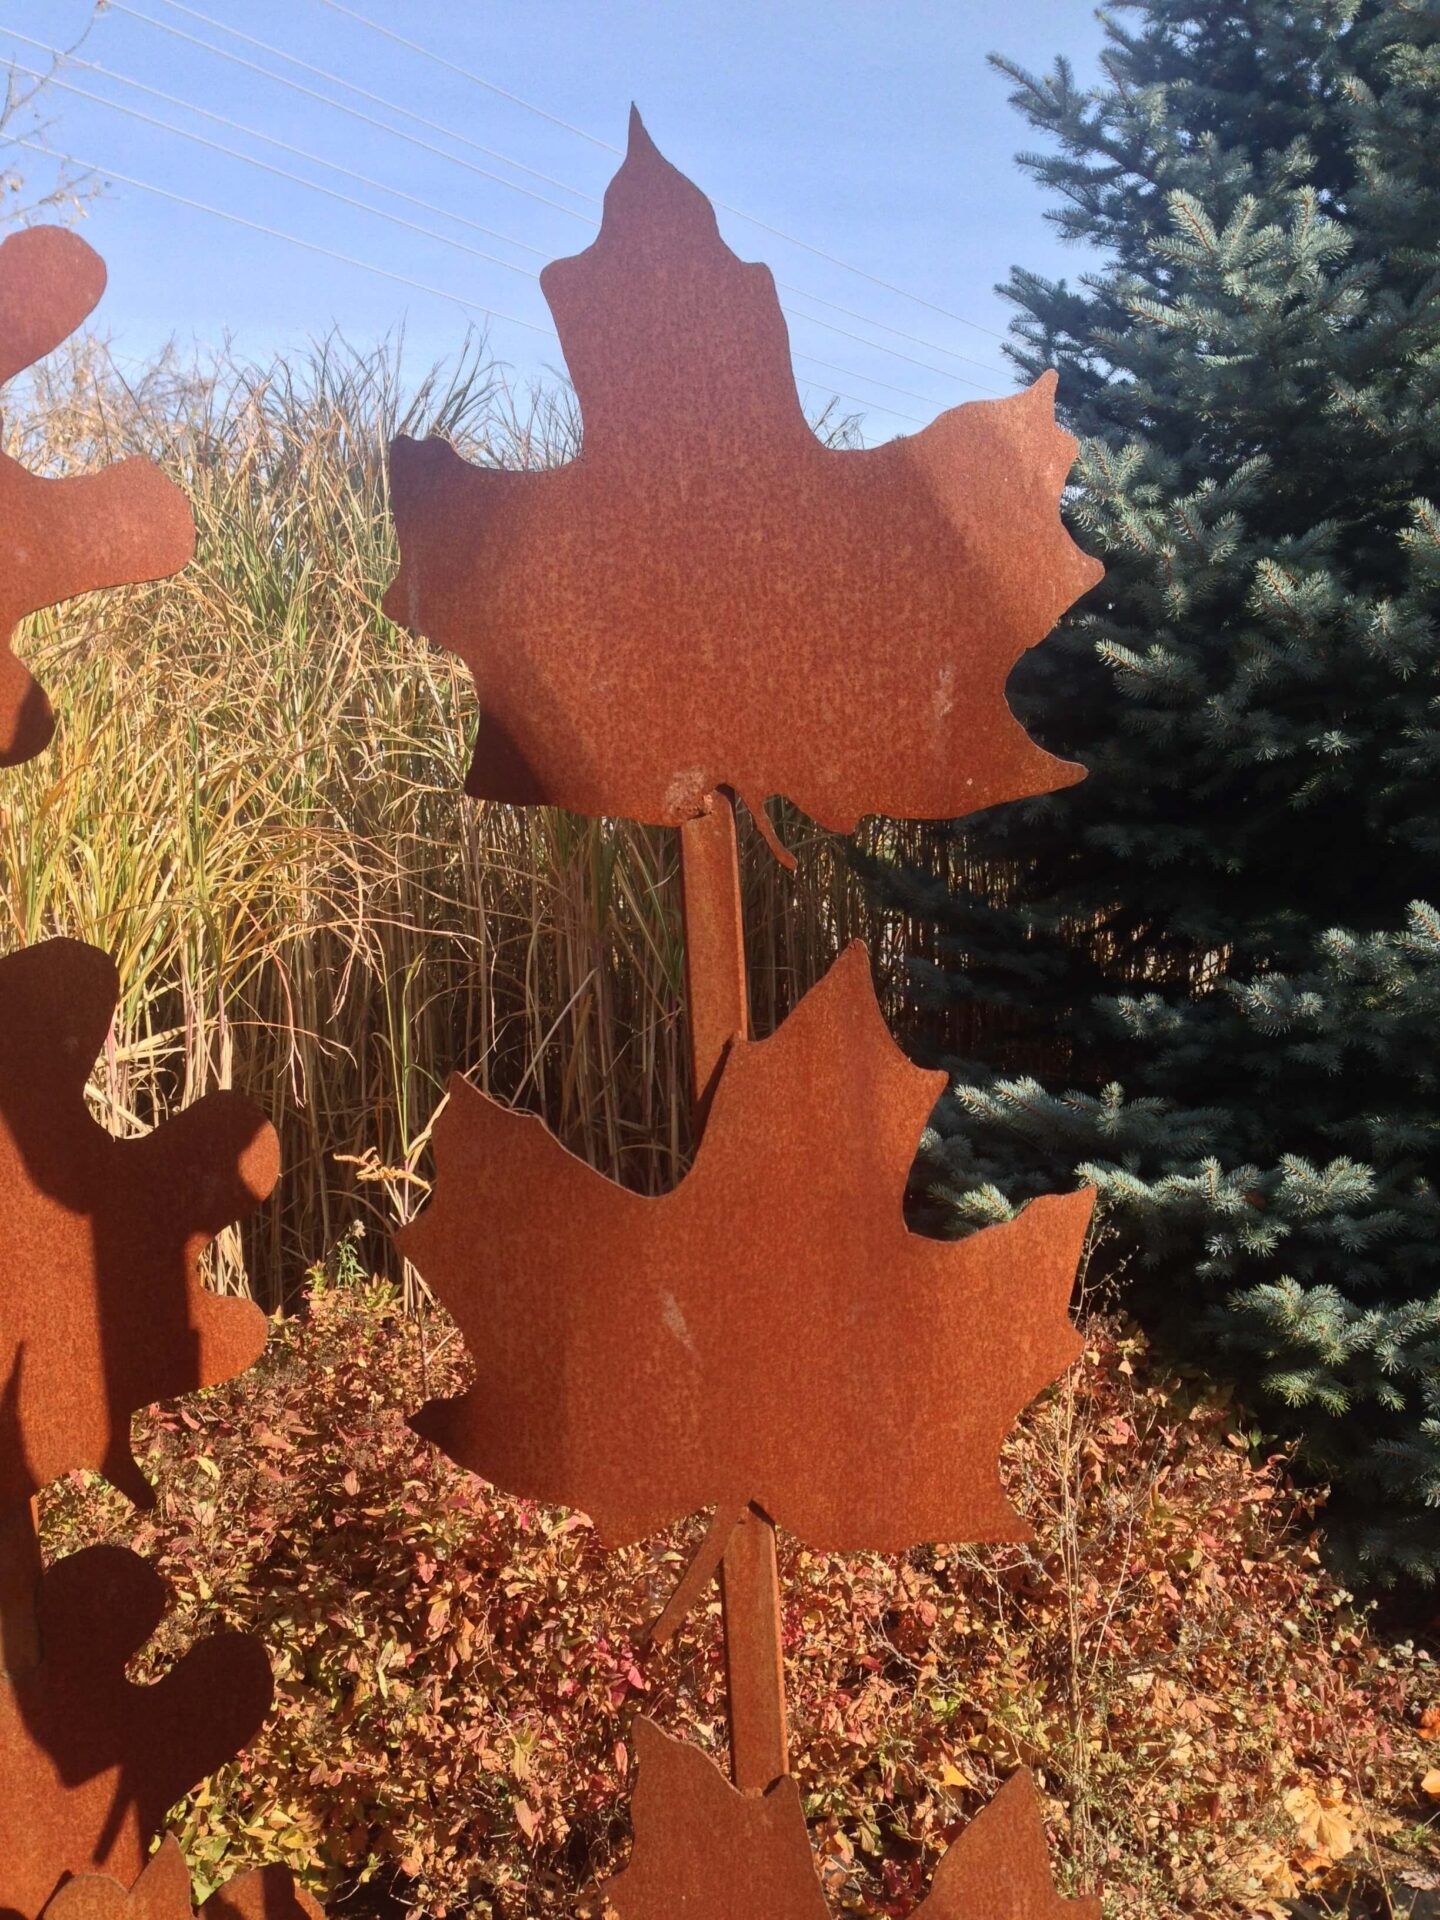 Steel Maple Leaf Sculpture as an example of something made in an art studio number 1 in the list of backyard business ideas.